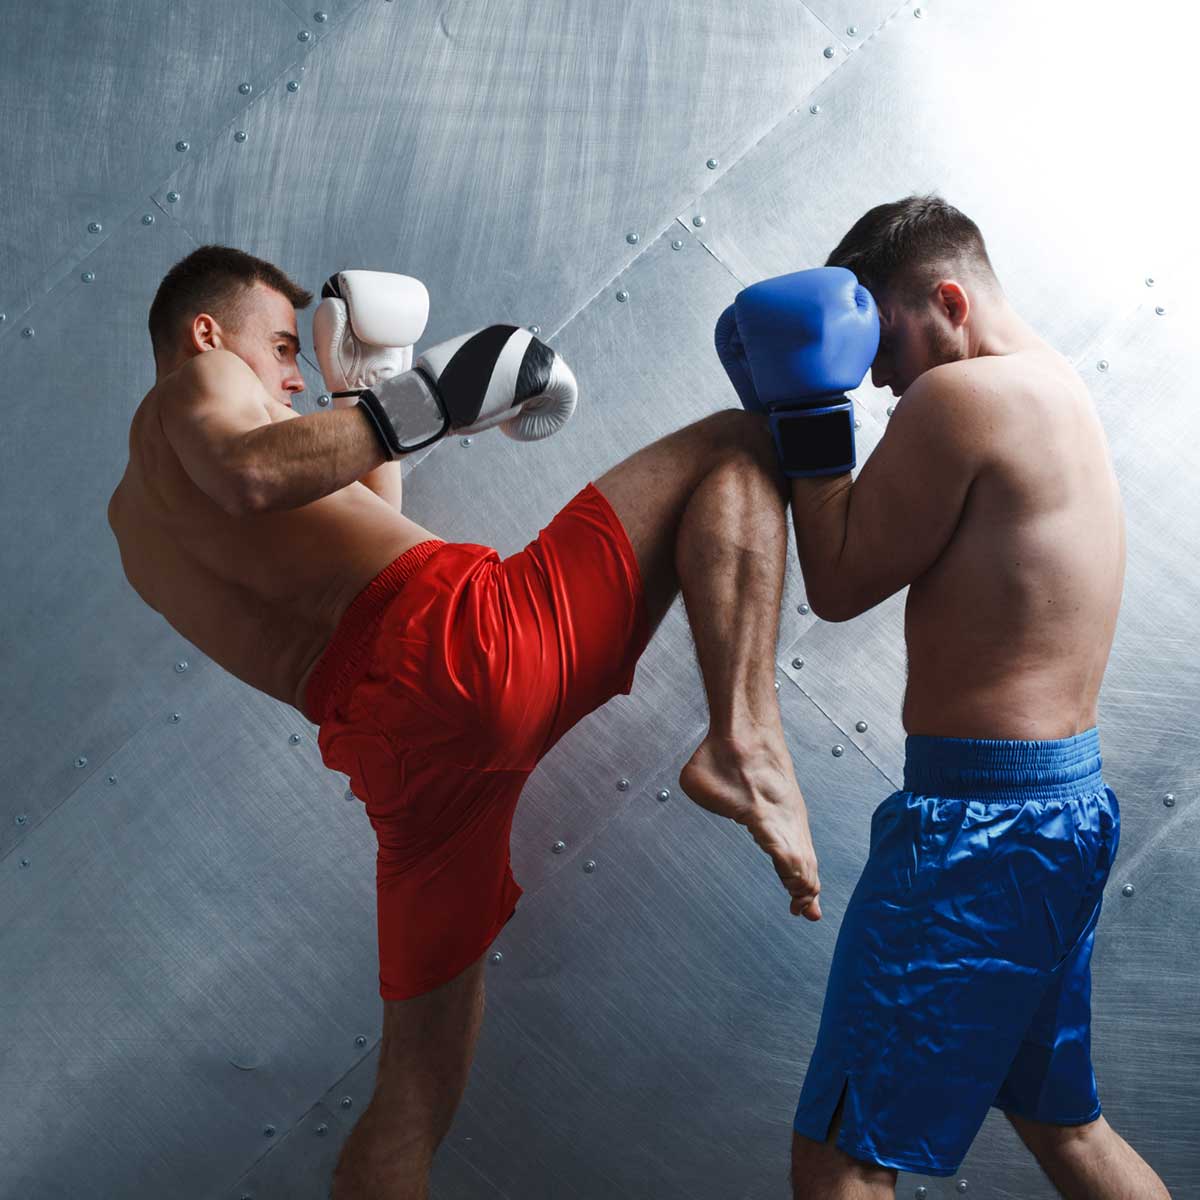 Fight Shorts Manufacturers in Volgograd